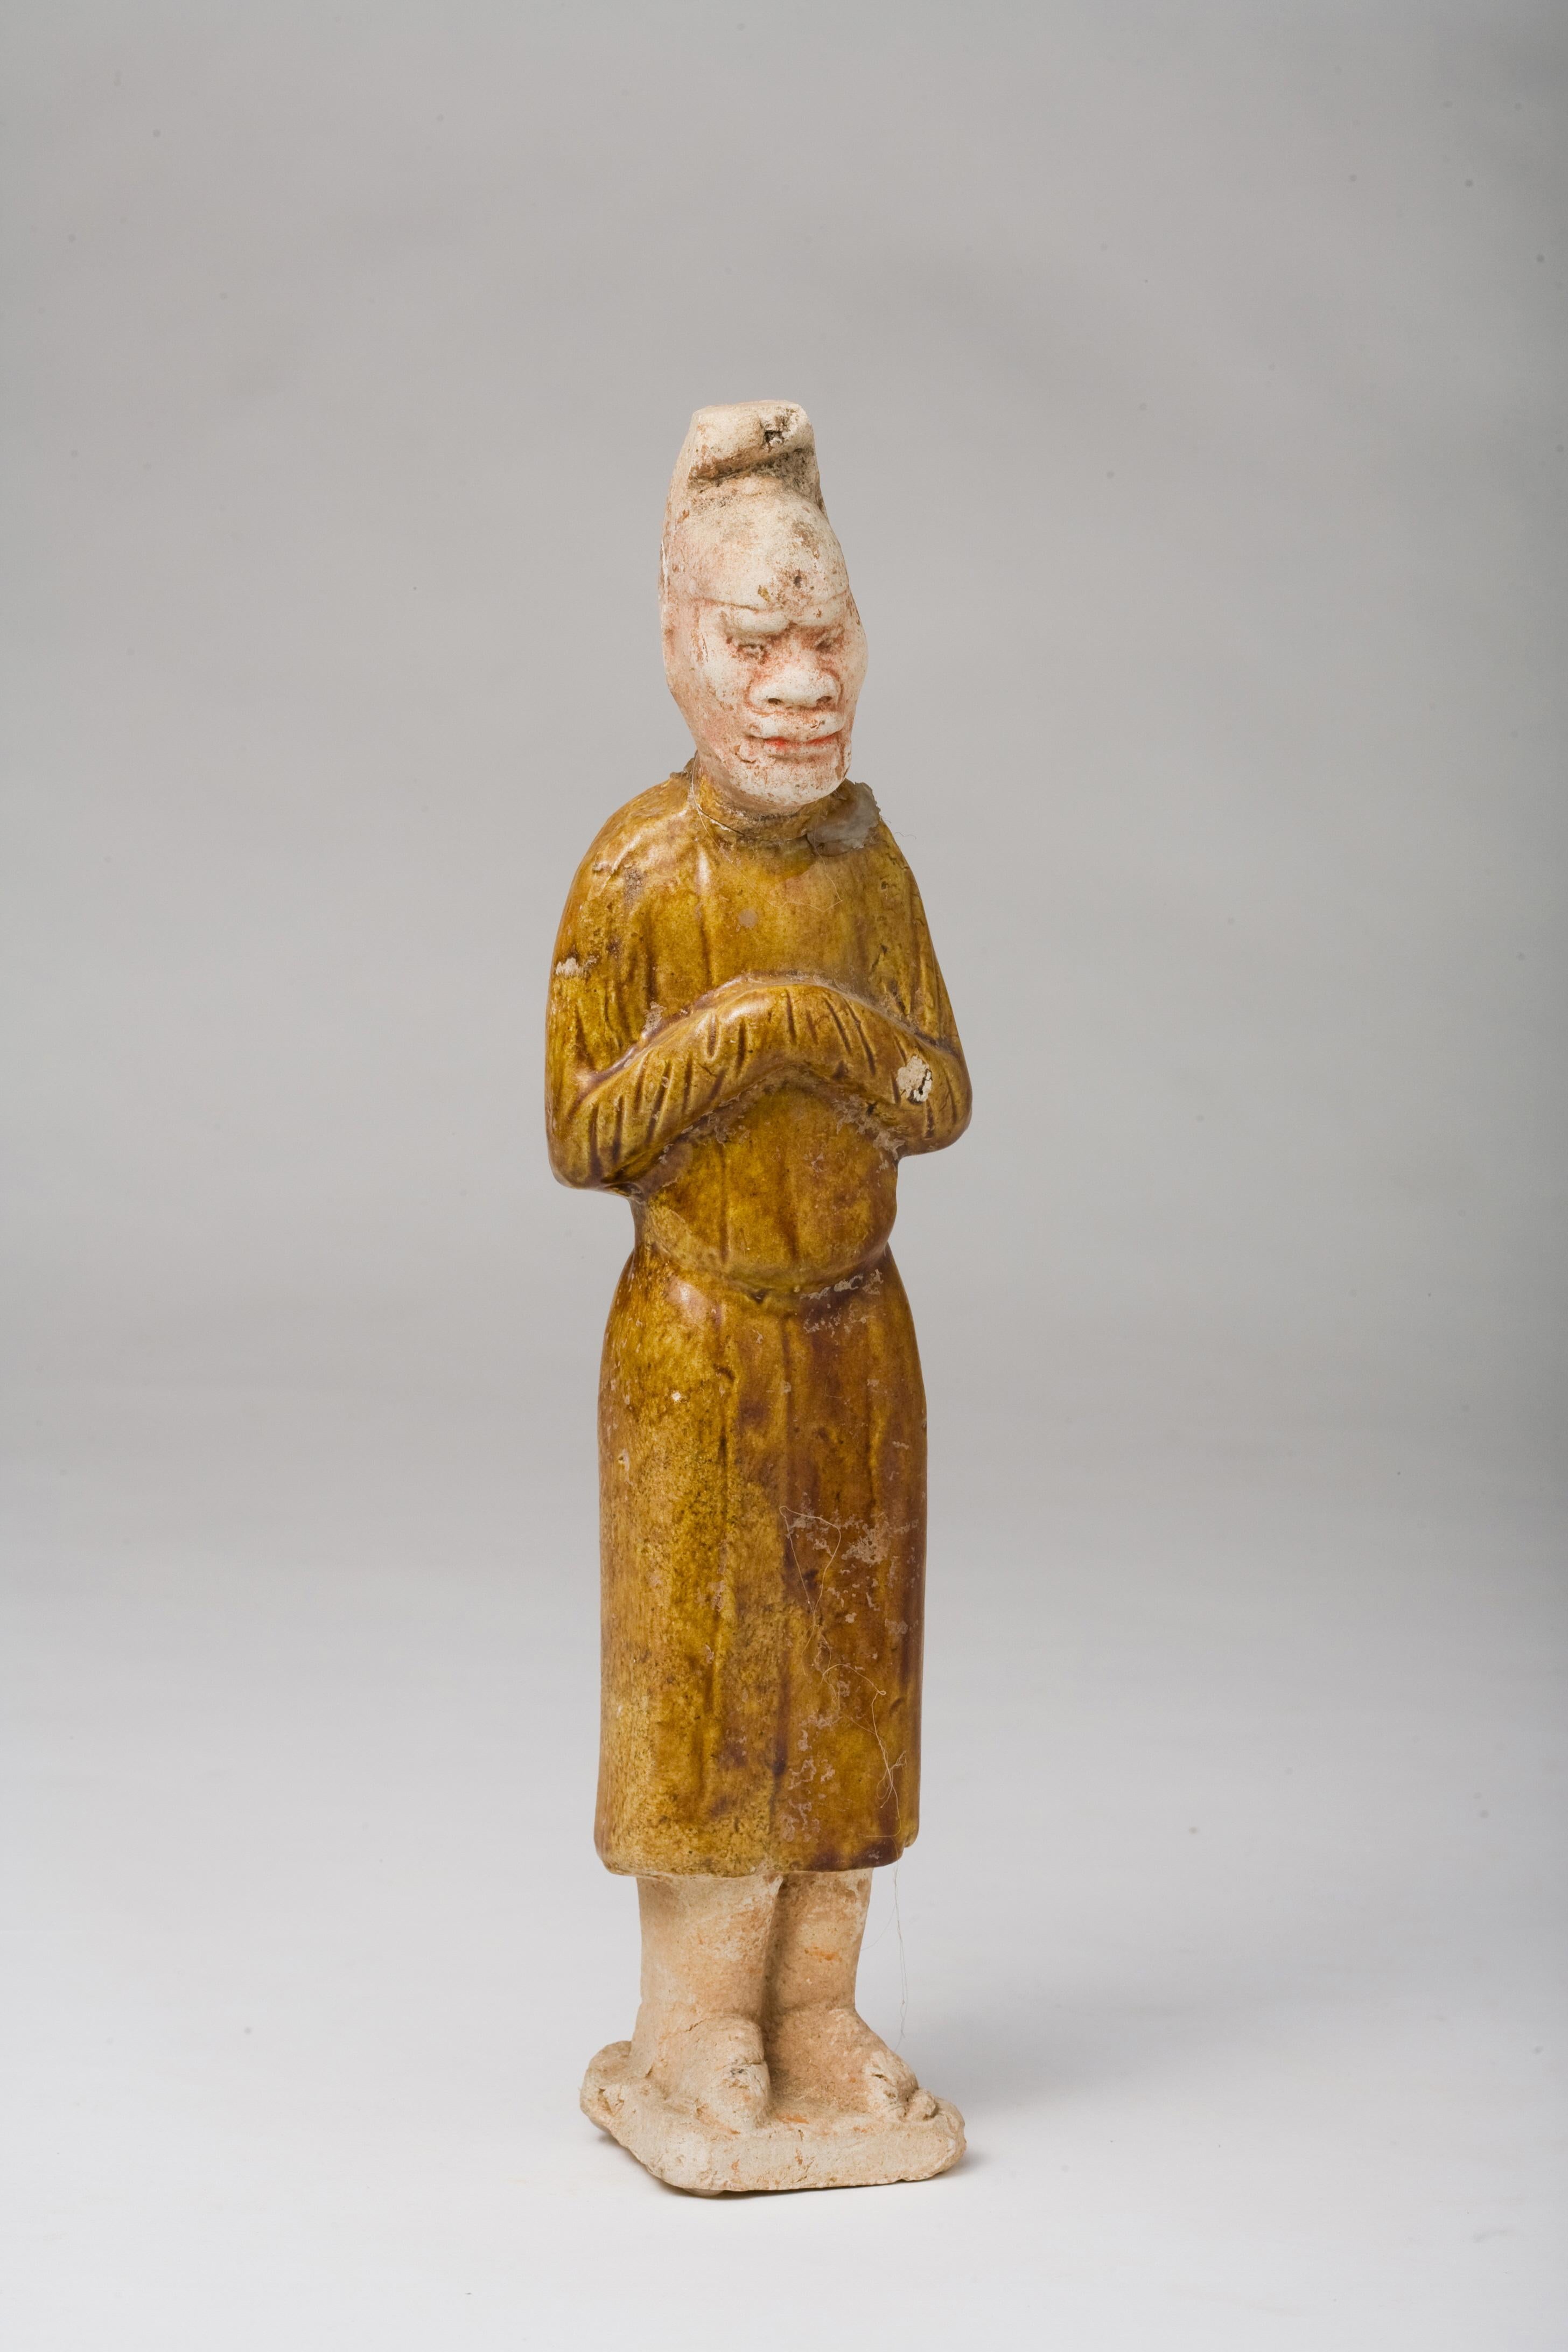 The figure stands with arms crossed in front, a pose that is often seen in tomb figurines which were intended to serve the deceased in the afterlife. The long robe and facial features of the figure are intricately crafted, showcasing the meticulous